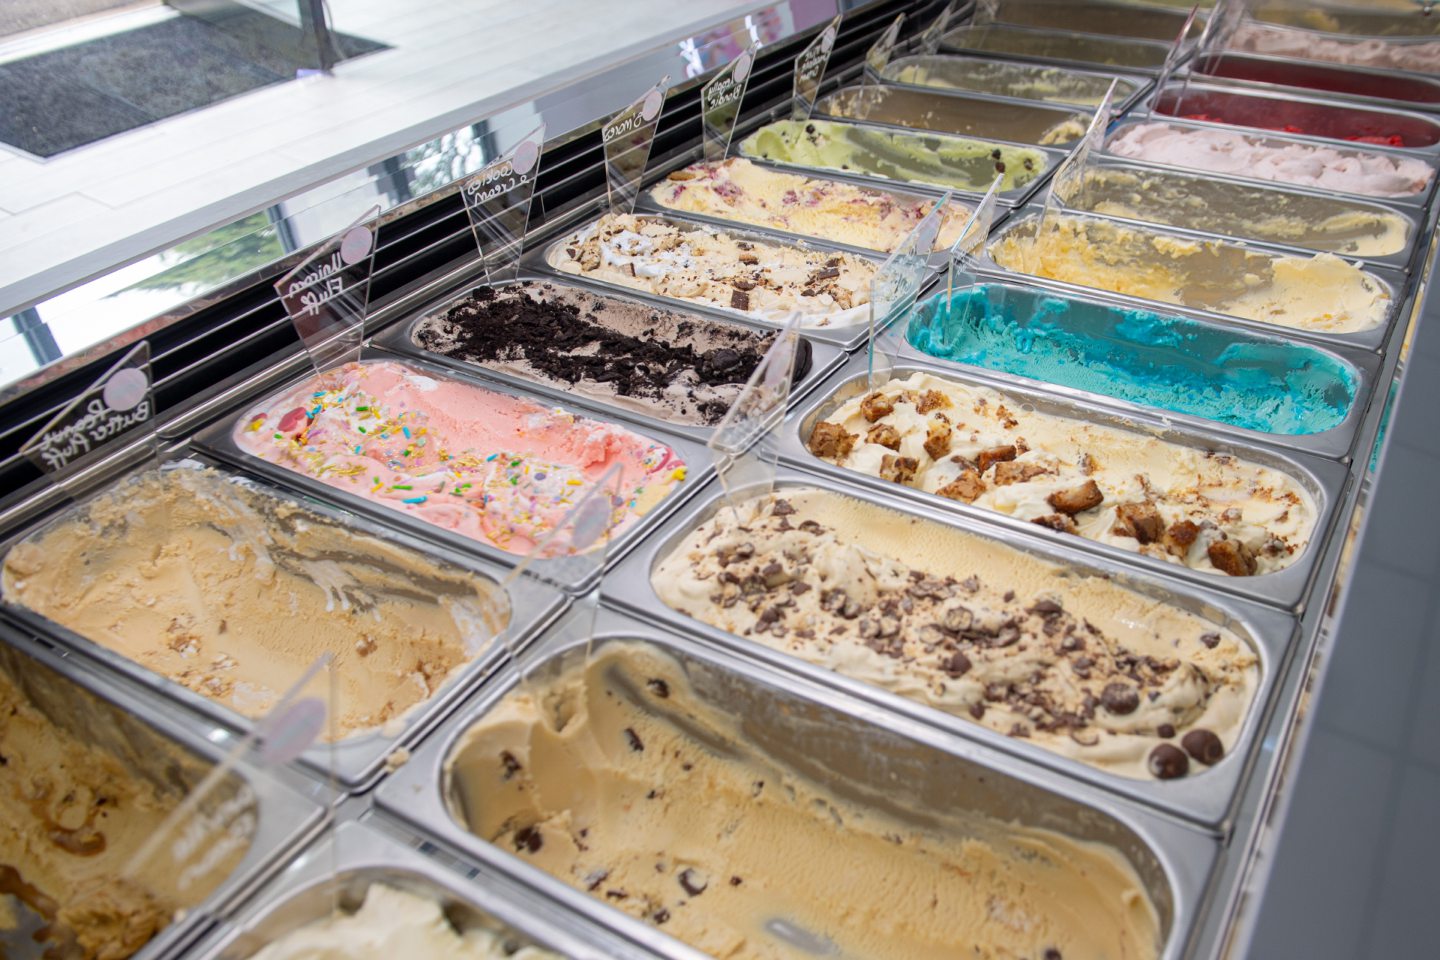 The selection of ice cream available at Lolly's ice cream in Portlethen